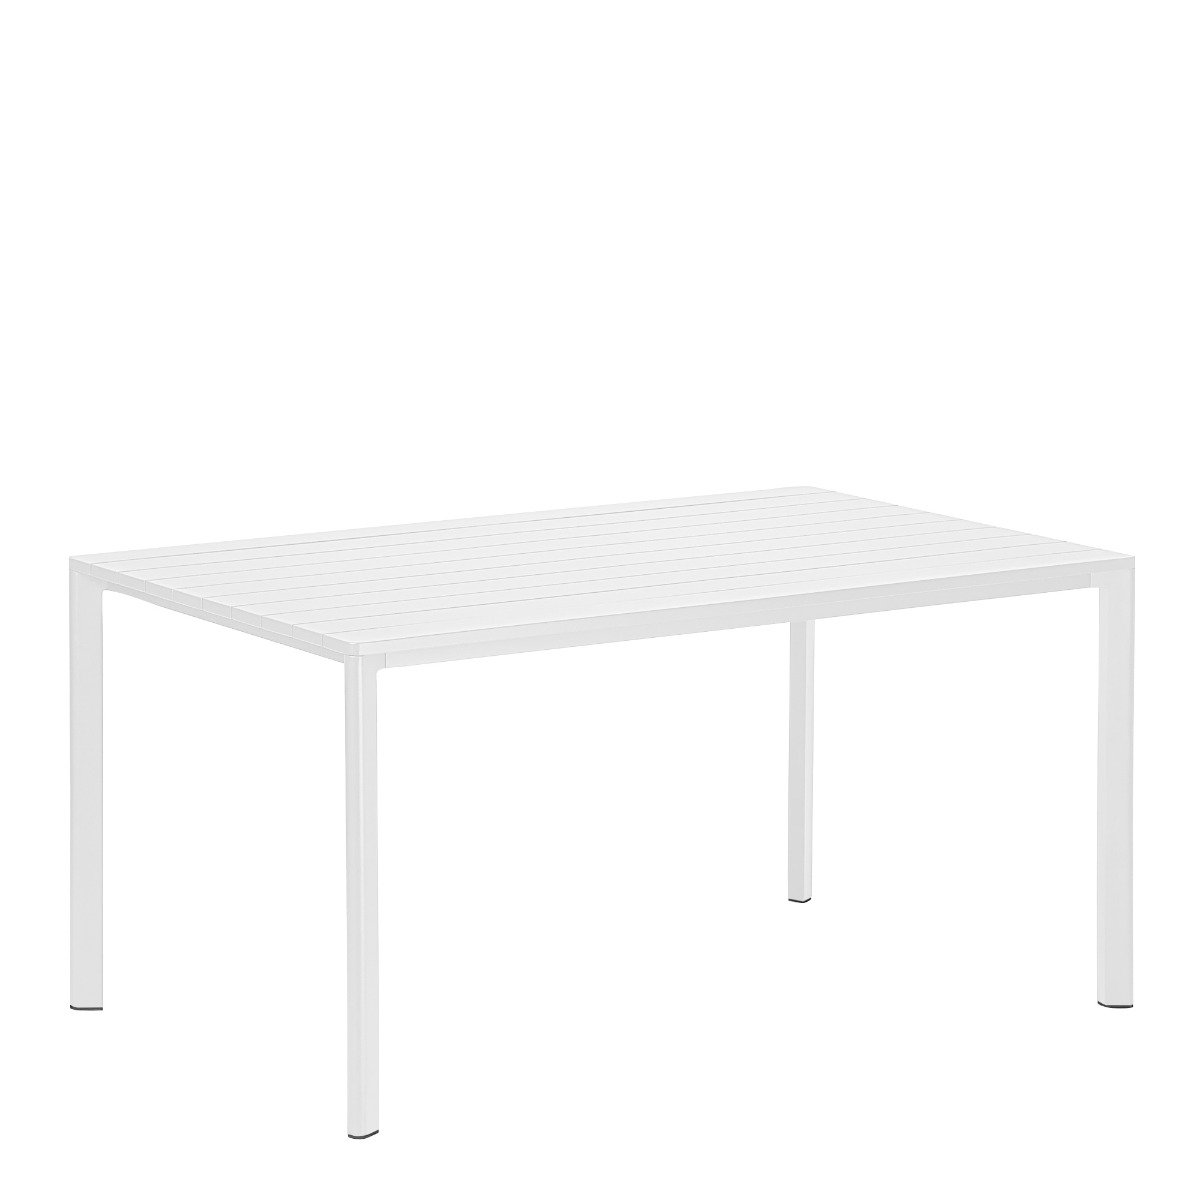 Highline Outdoor Rectangular Table in White By The Conran Shop